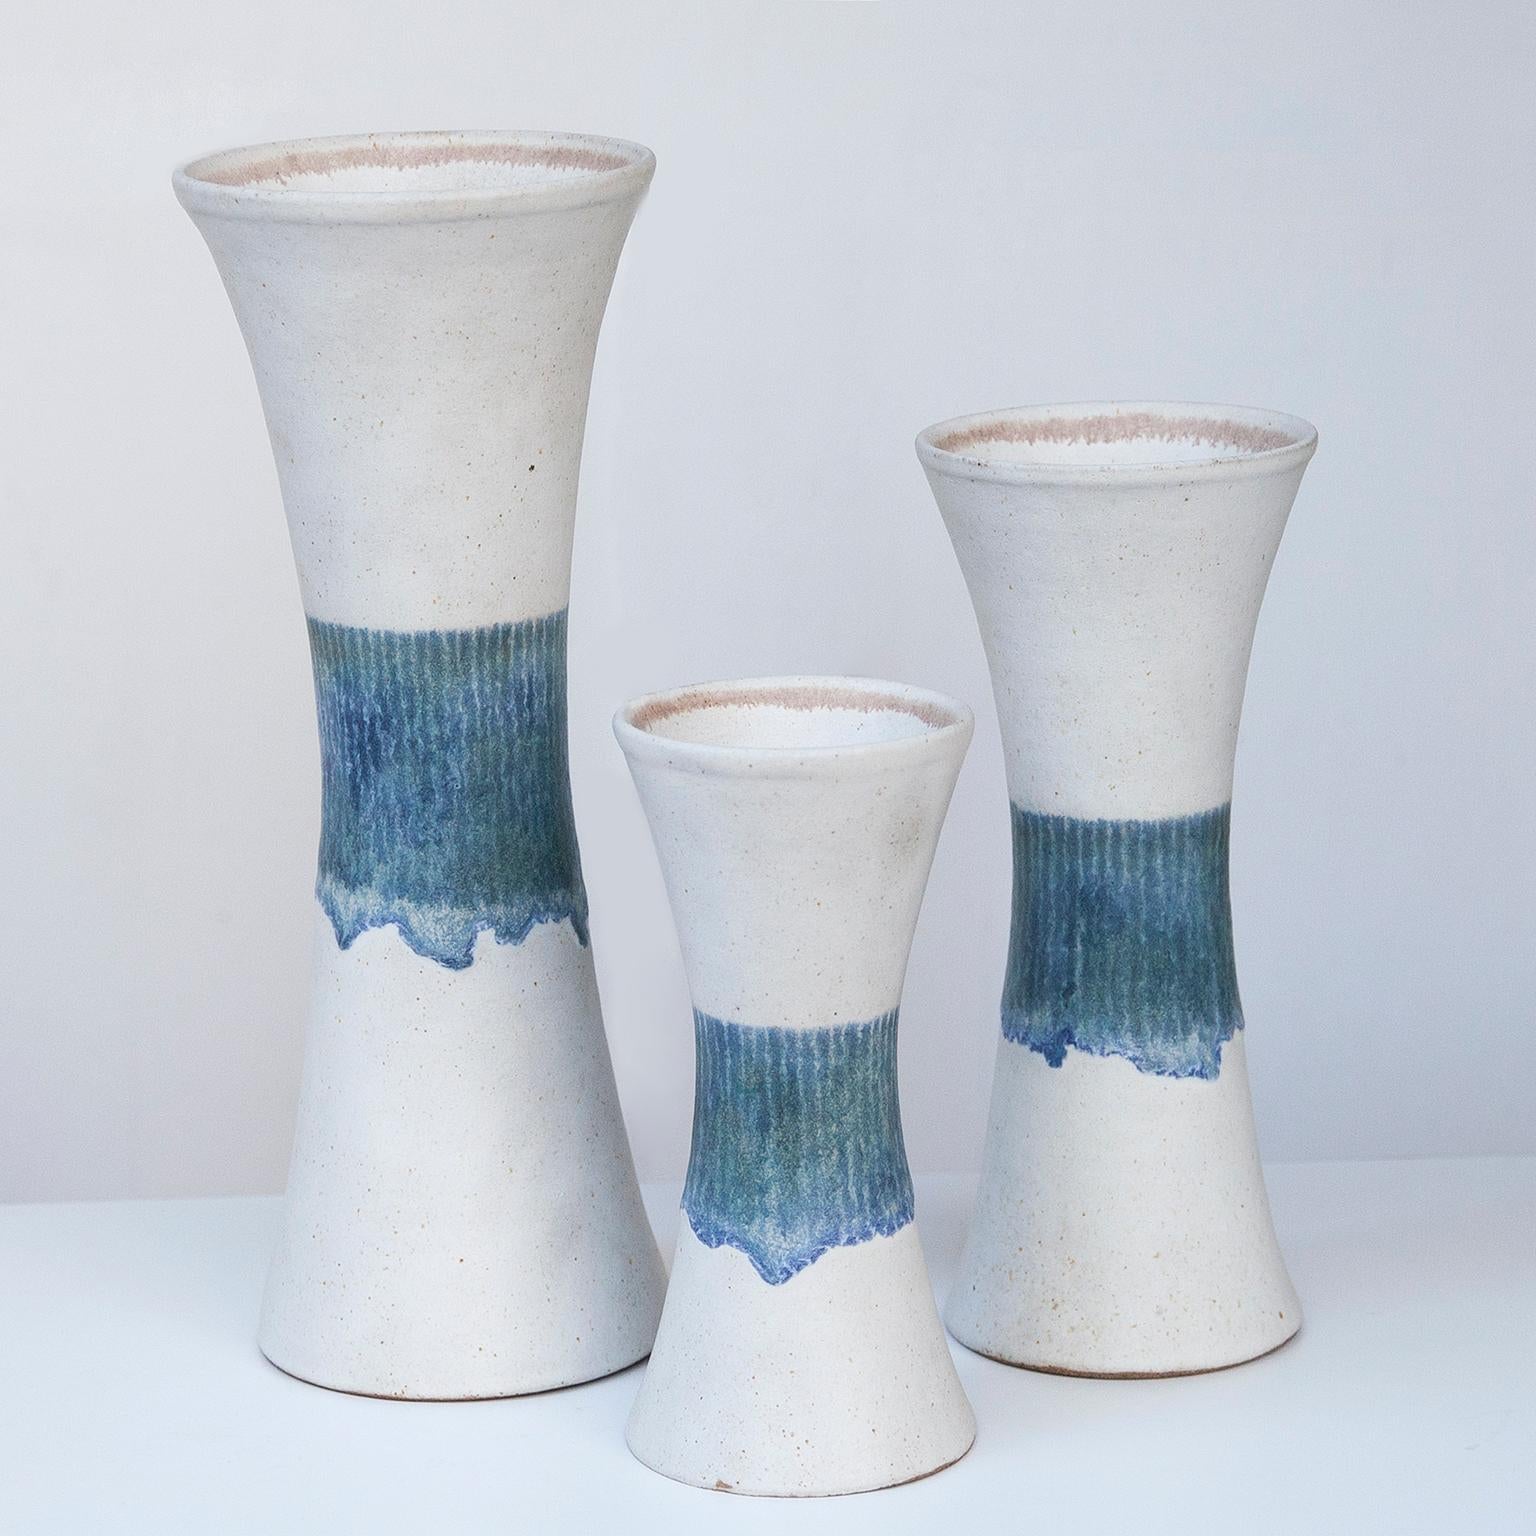 Bruno Gambone set of three vase in white and blue stoneware Italy 1970s, signed Gambone, Italy.

40 H x 16 D, 31 H x 13 D, 24 H x 11 D cm.